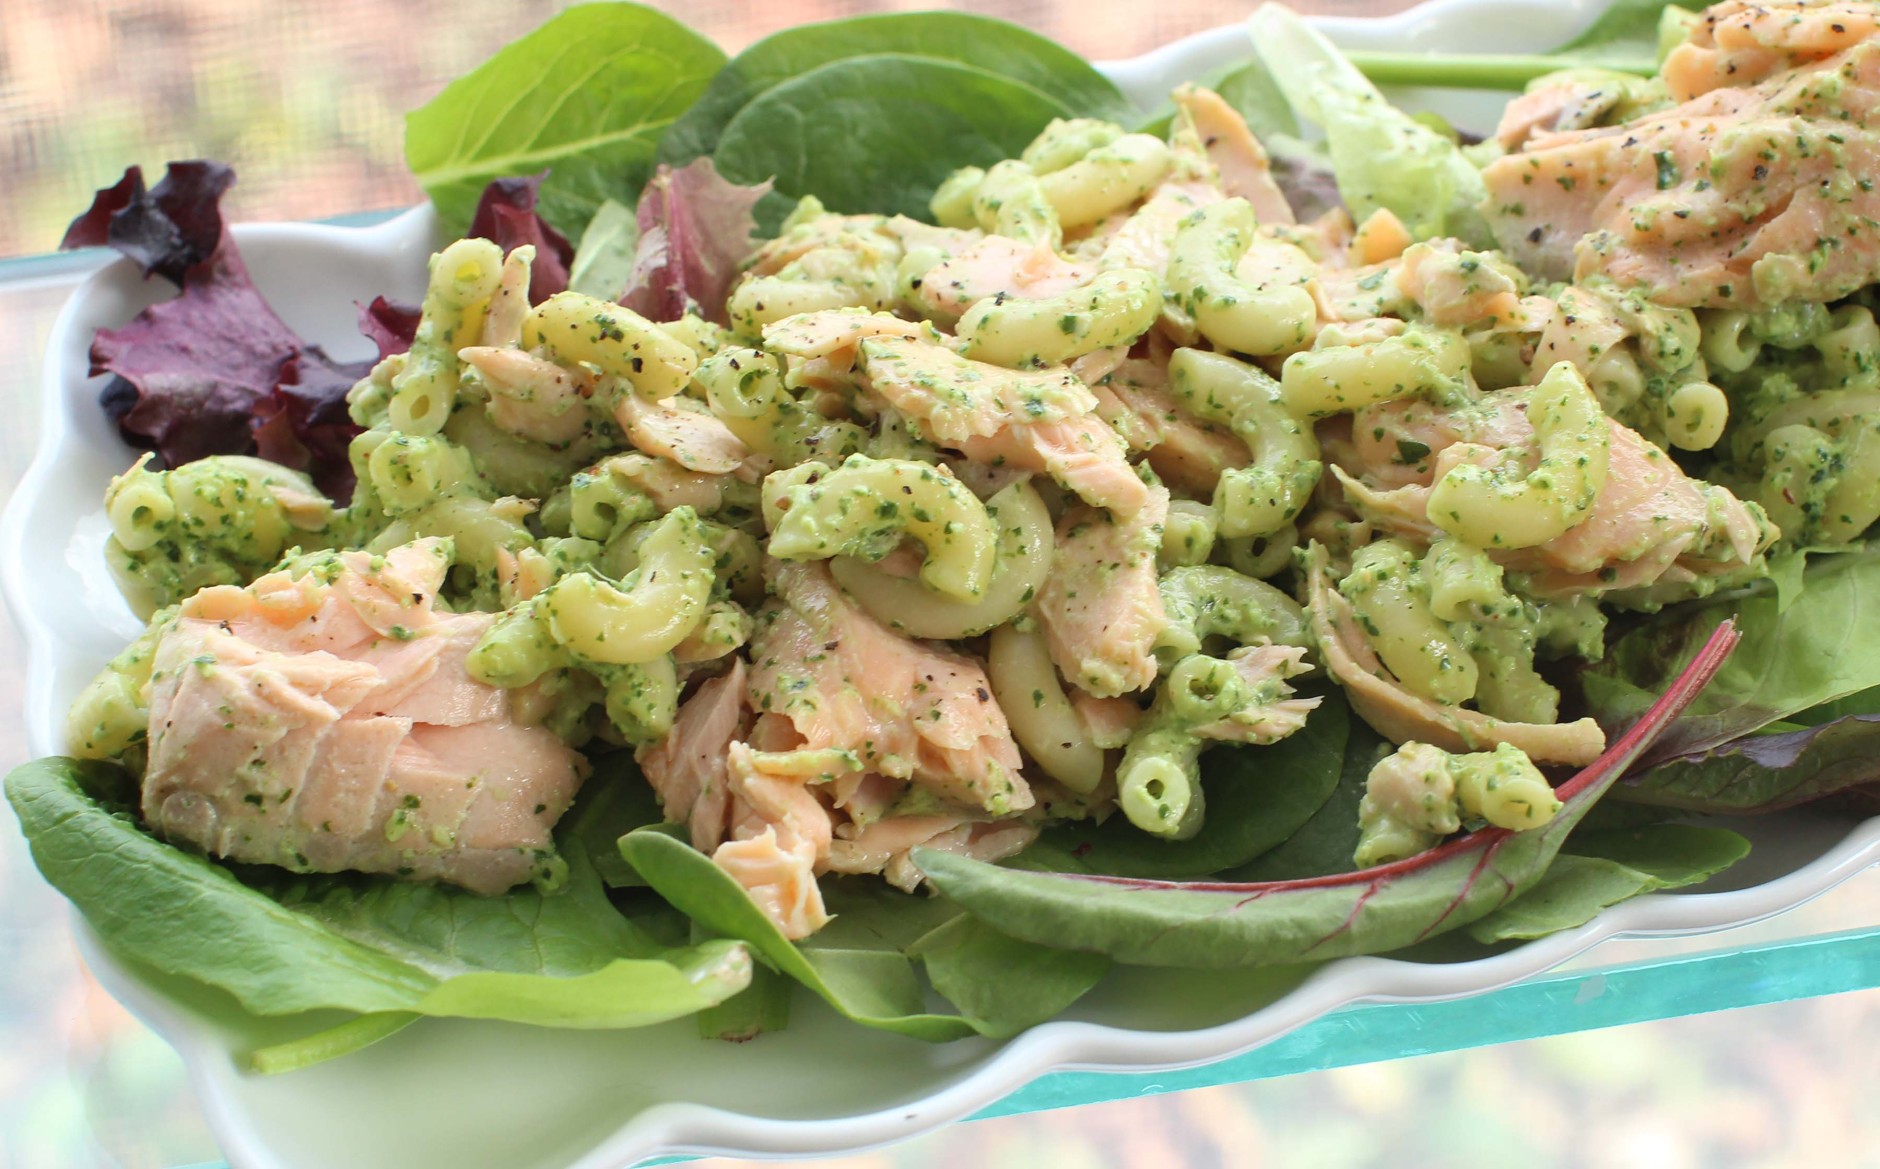 This Feb. 1, 2016 photo shows pasta salad with salmon and creamy cilantro dressing in Concord, N.H. This delicious spring dish is easy to assemble and travels well, making it perfect for packed lunches and picnics. It also can be prepped in advance by poaching the fish and cooking the pasta the night before. (AP Photos/Matthew Mead)